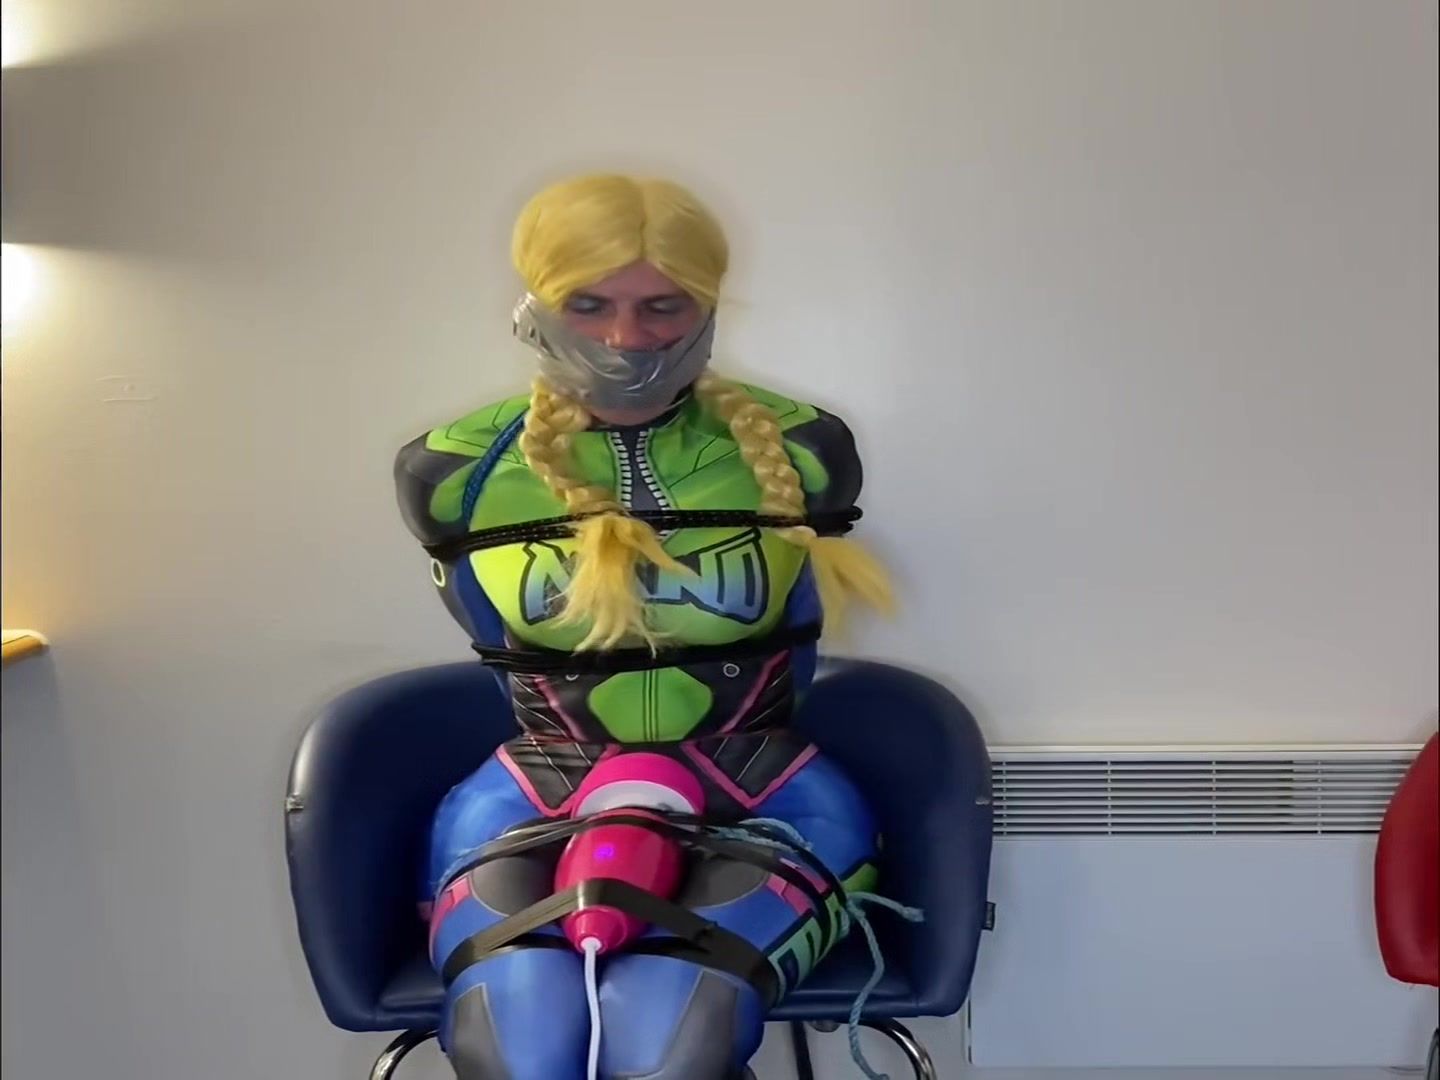 Hot Naked Girl Cd Bound, Gagged And Cumming In Costume - D Va Footfetish - 1